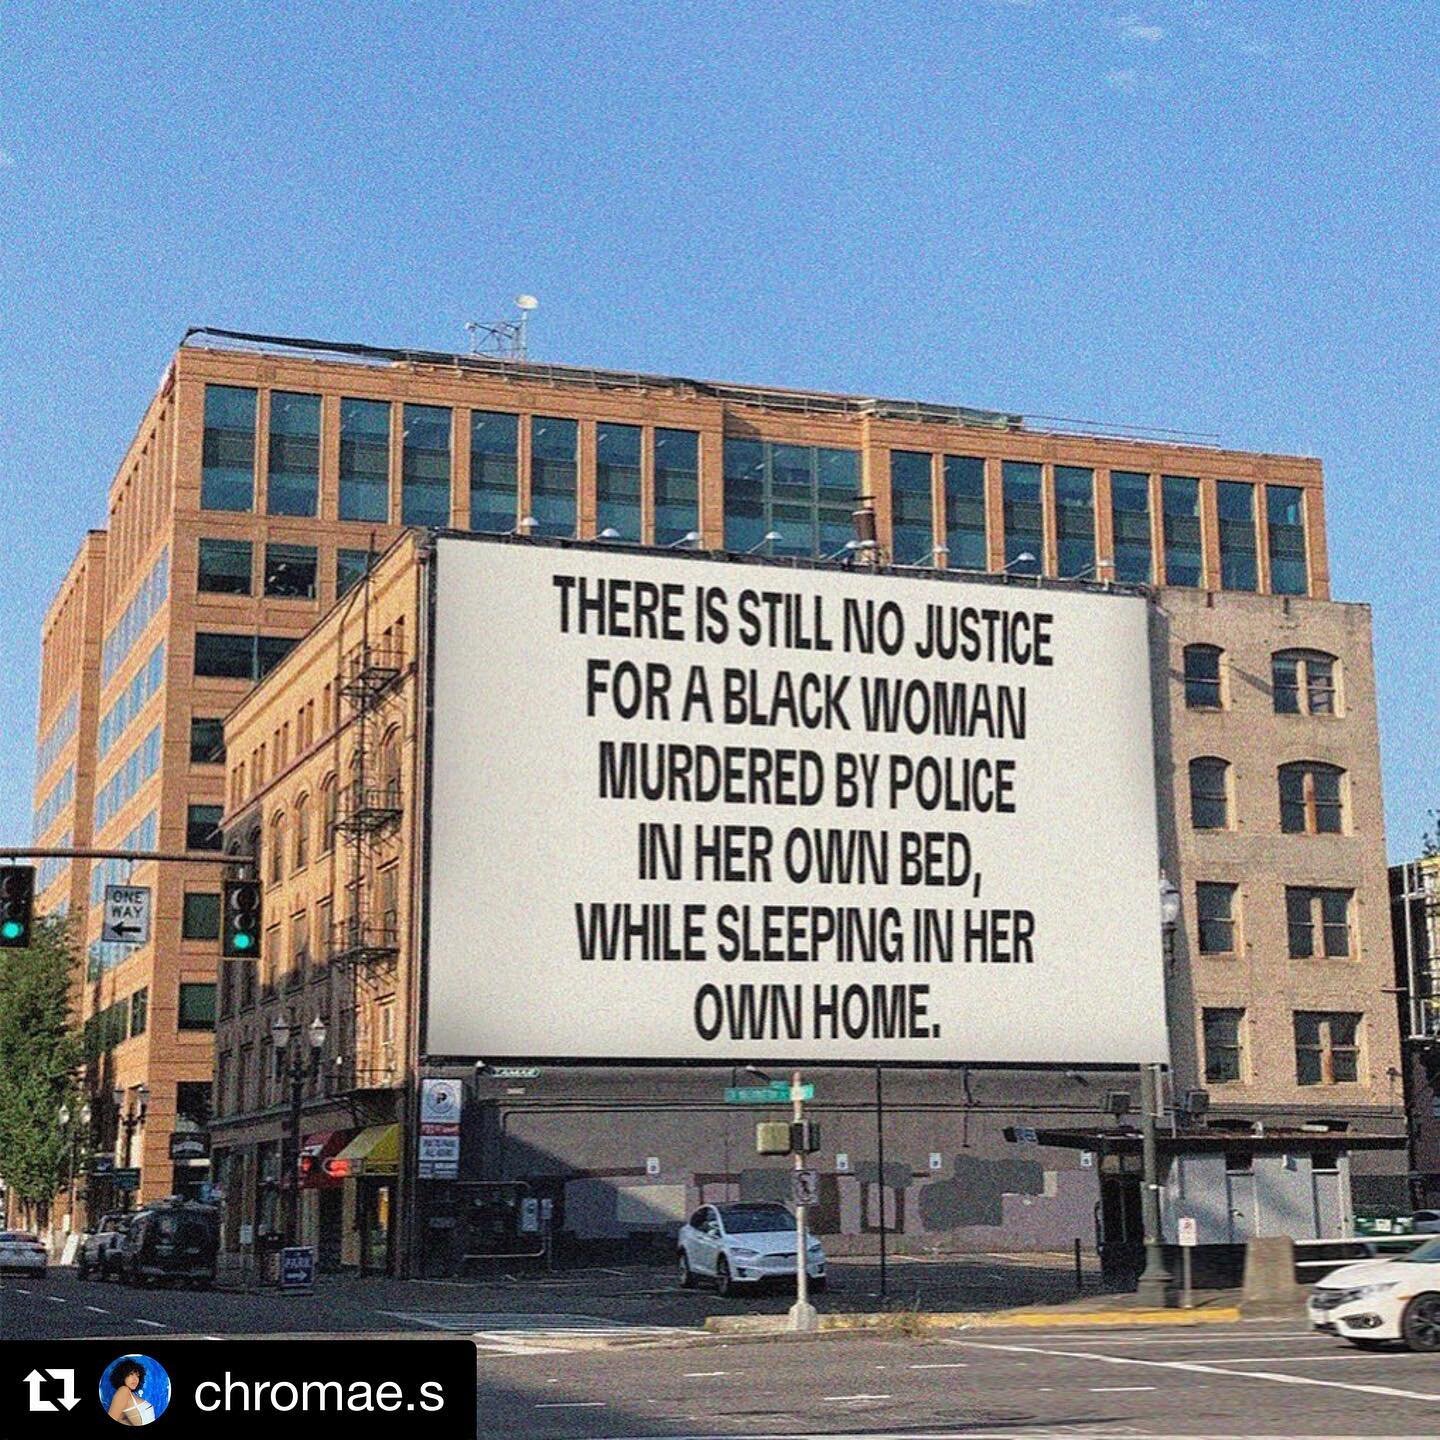 #breonnataylor #justiceforbreonnataylor 

#Repost @chromae.s
・・・
Since all im seeing on my TL are drake videos and avocado toast pictures here&rsquo;s a reminder. 

I&rsquo;m not seeing anything about Breonna Taylor anymore. There is still no justice